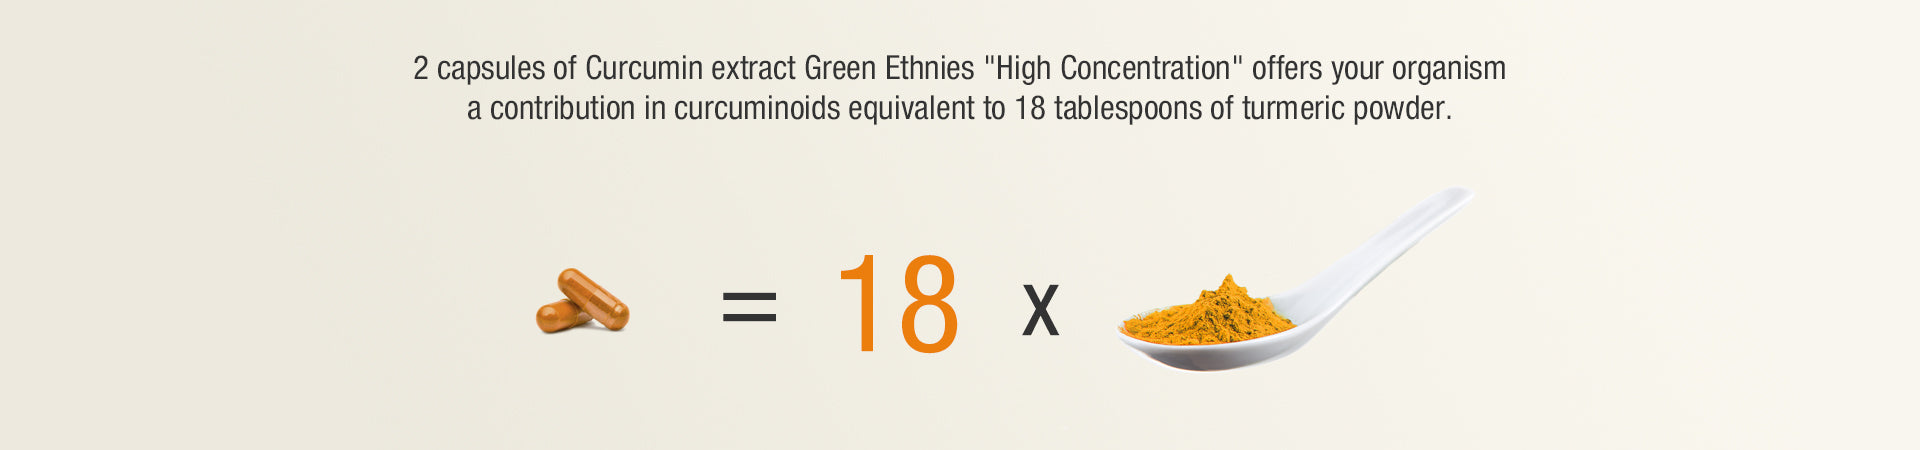 Organic Curcumin concentrated extract quality